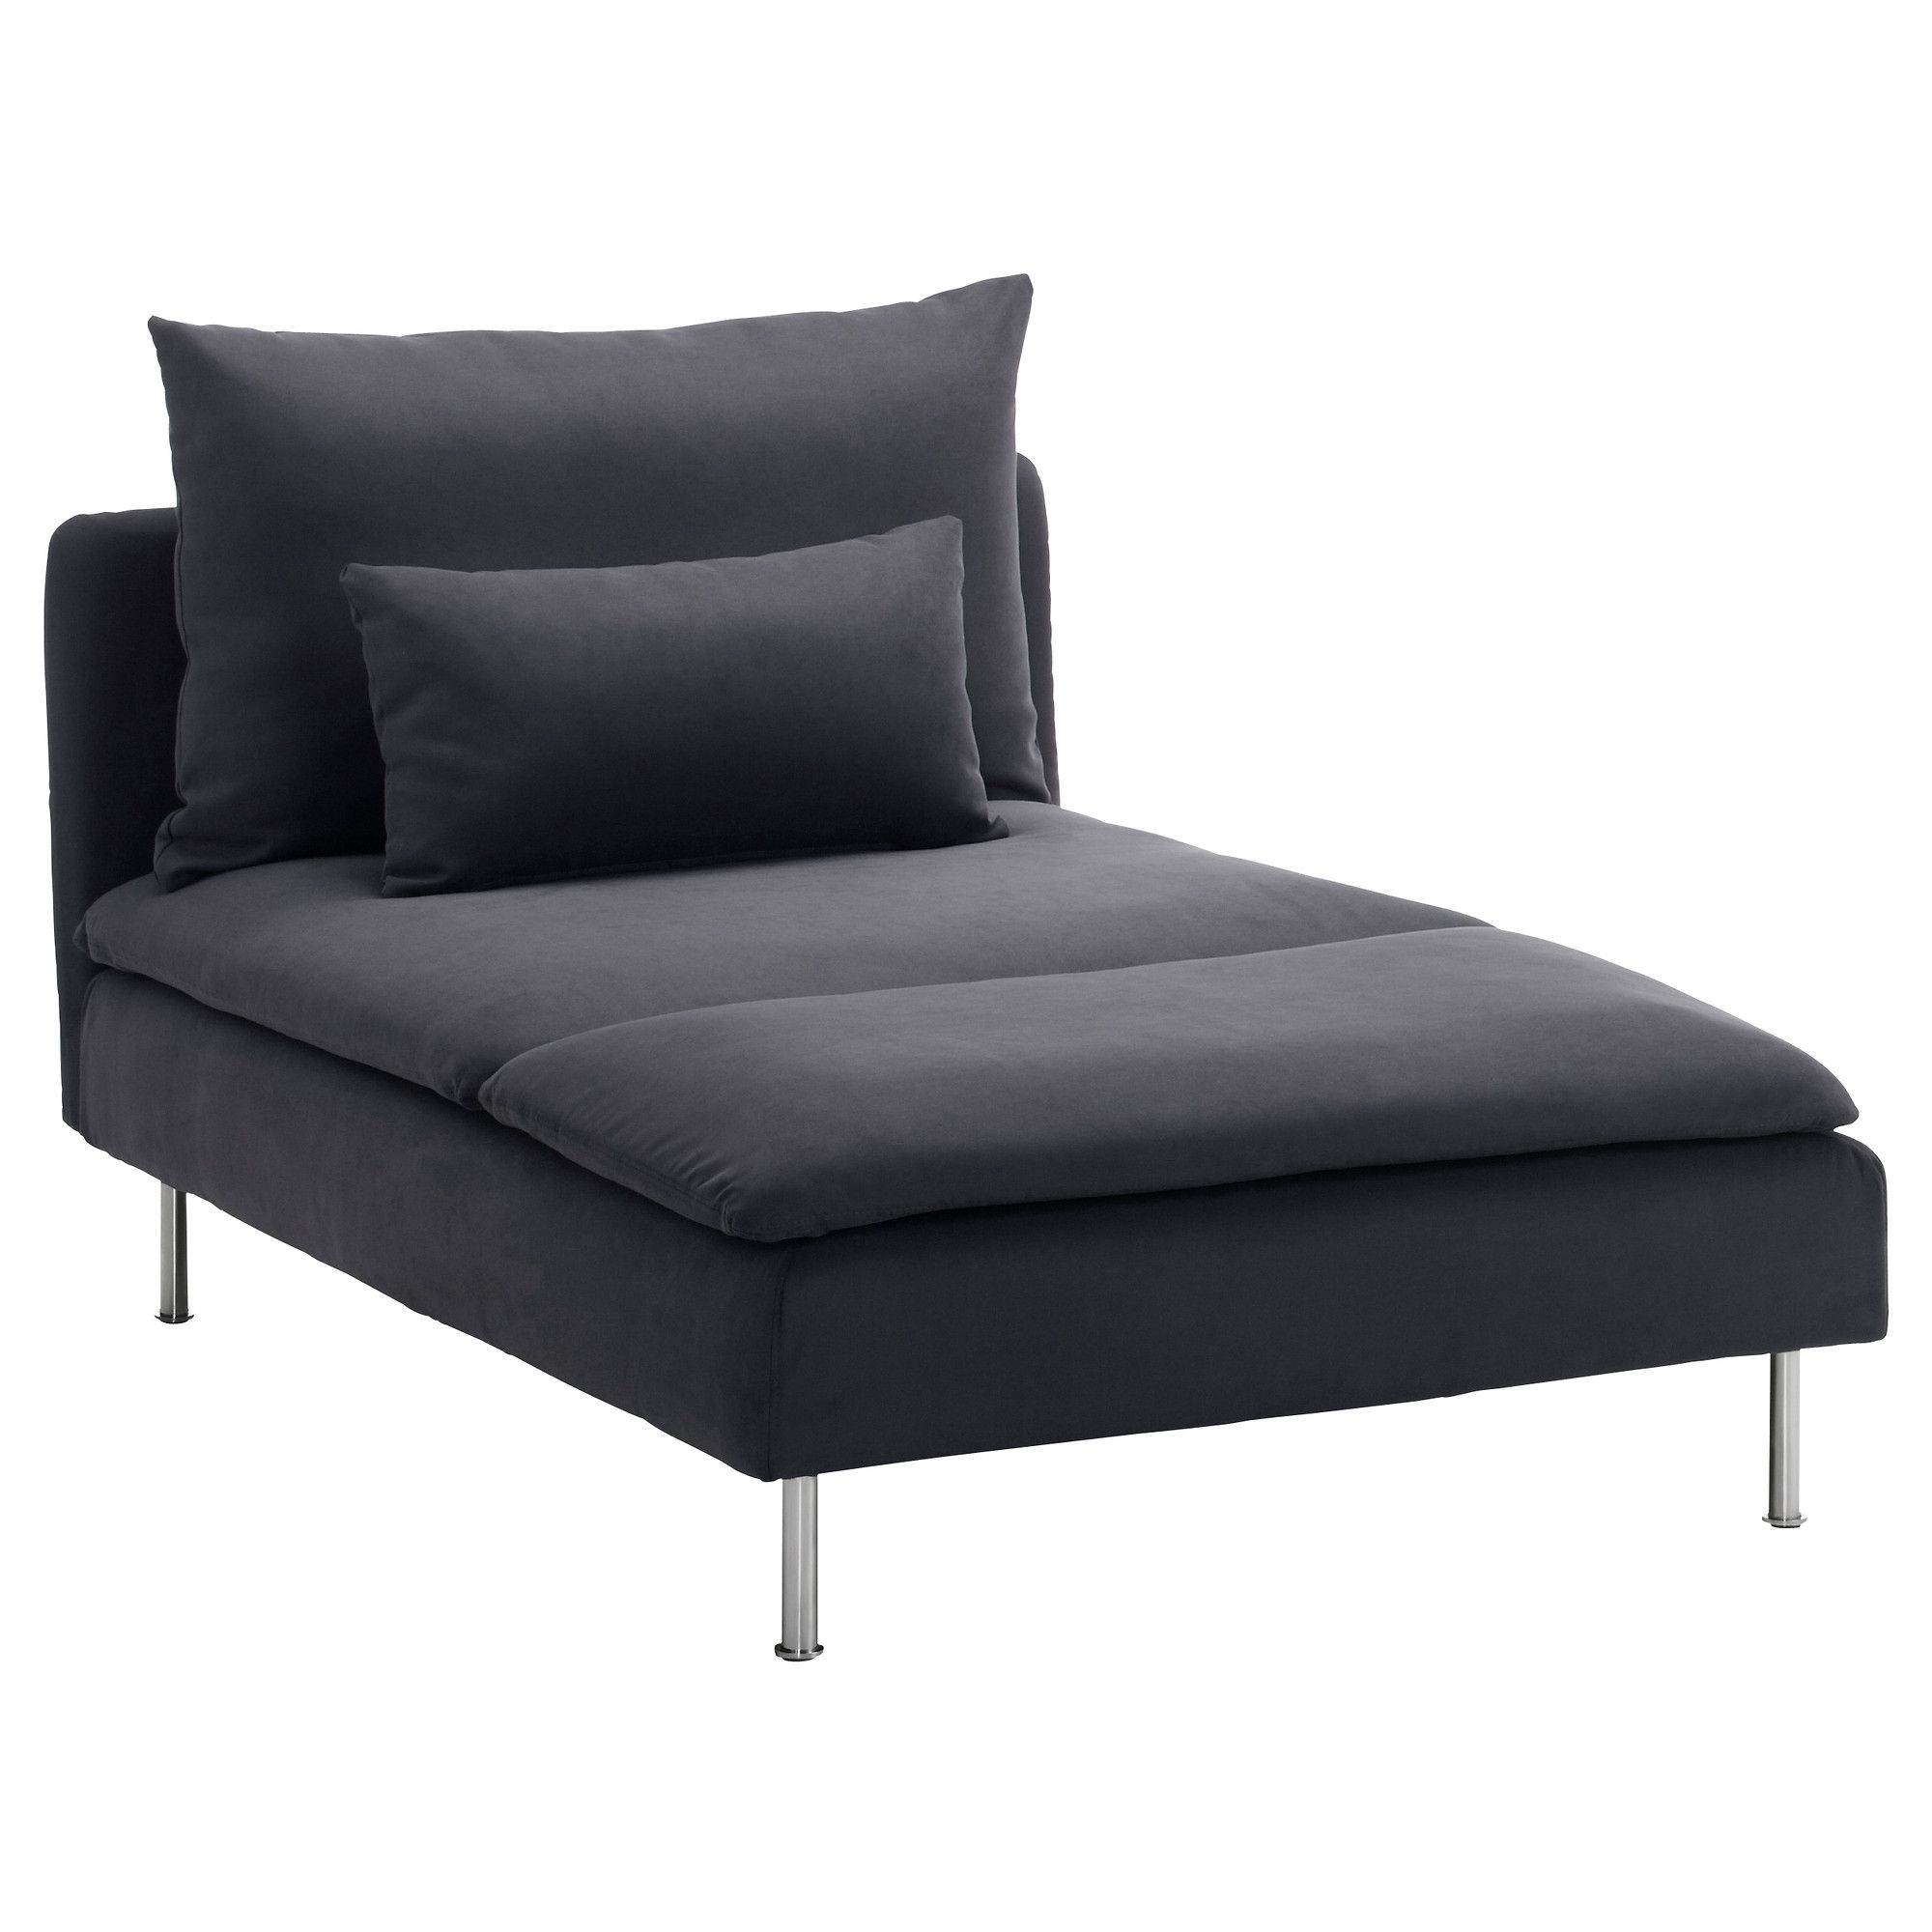 Söderhamn Chaise – Samsta Dark Gray – Ikea Throughout Fashionable Chaise Lounges (View 13 of 15)